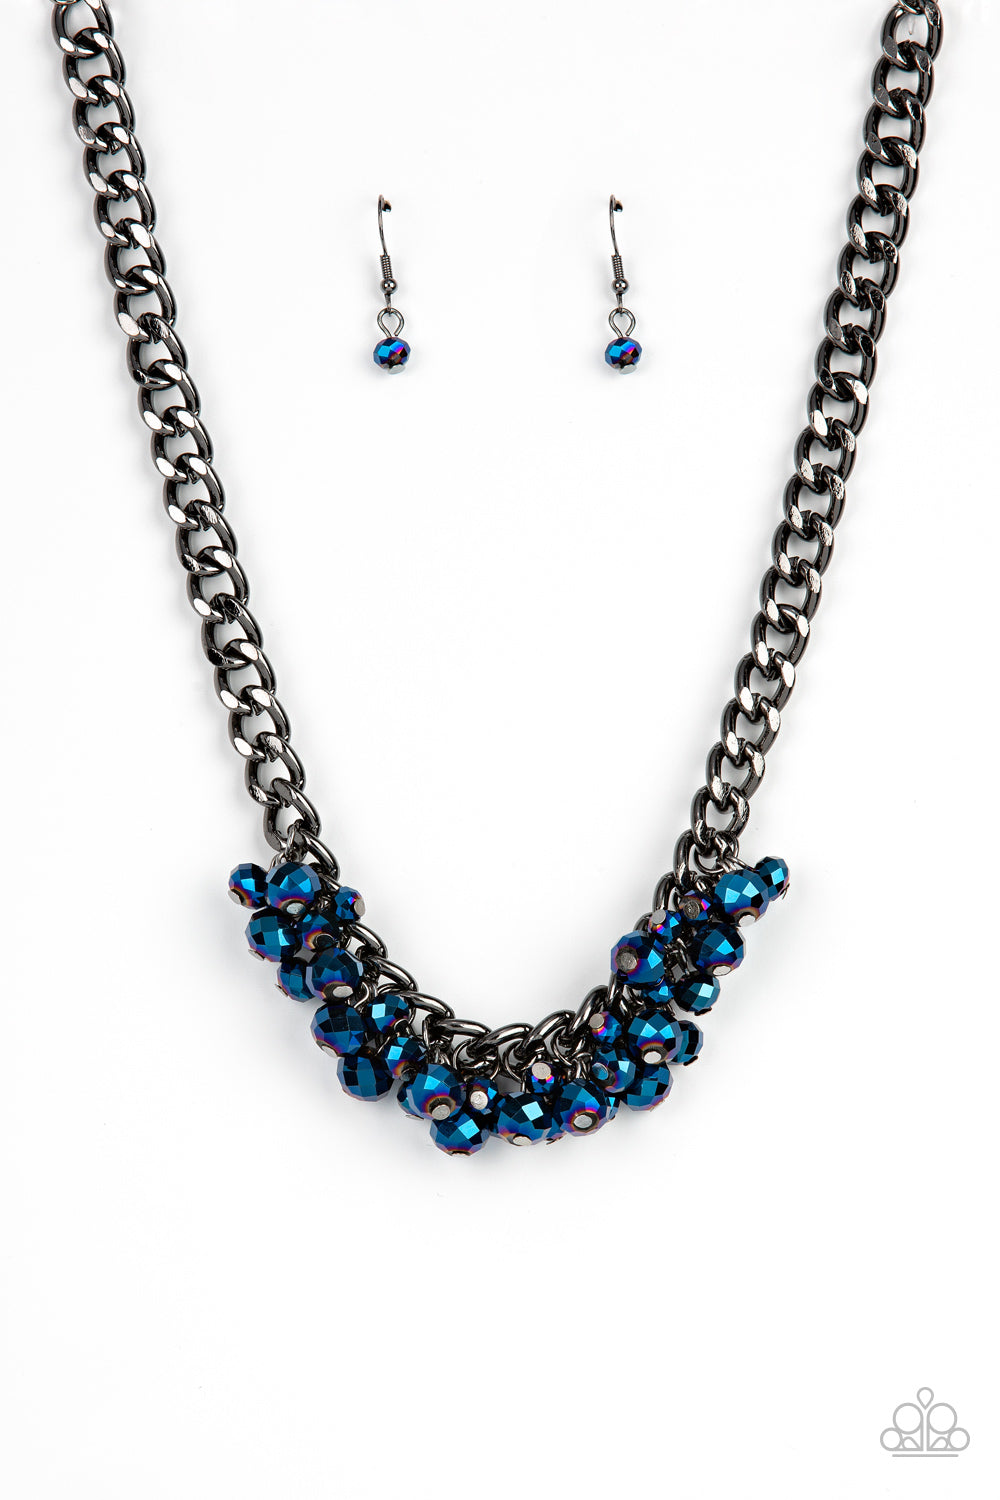 Paparazzi Accessories - Galactic Knockout #N777 - Blue Necklace